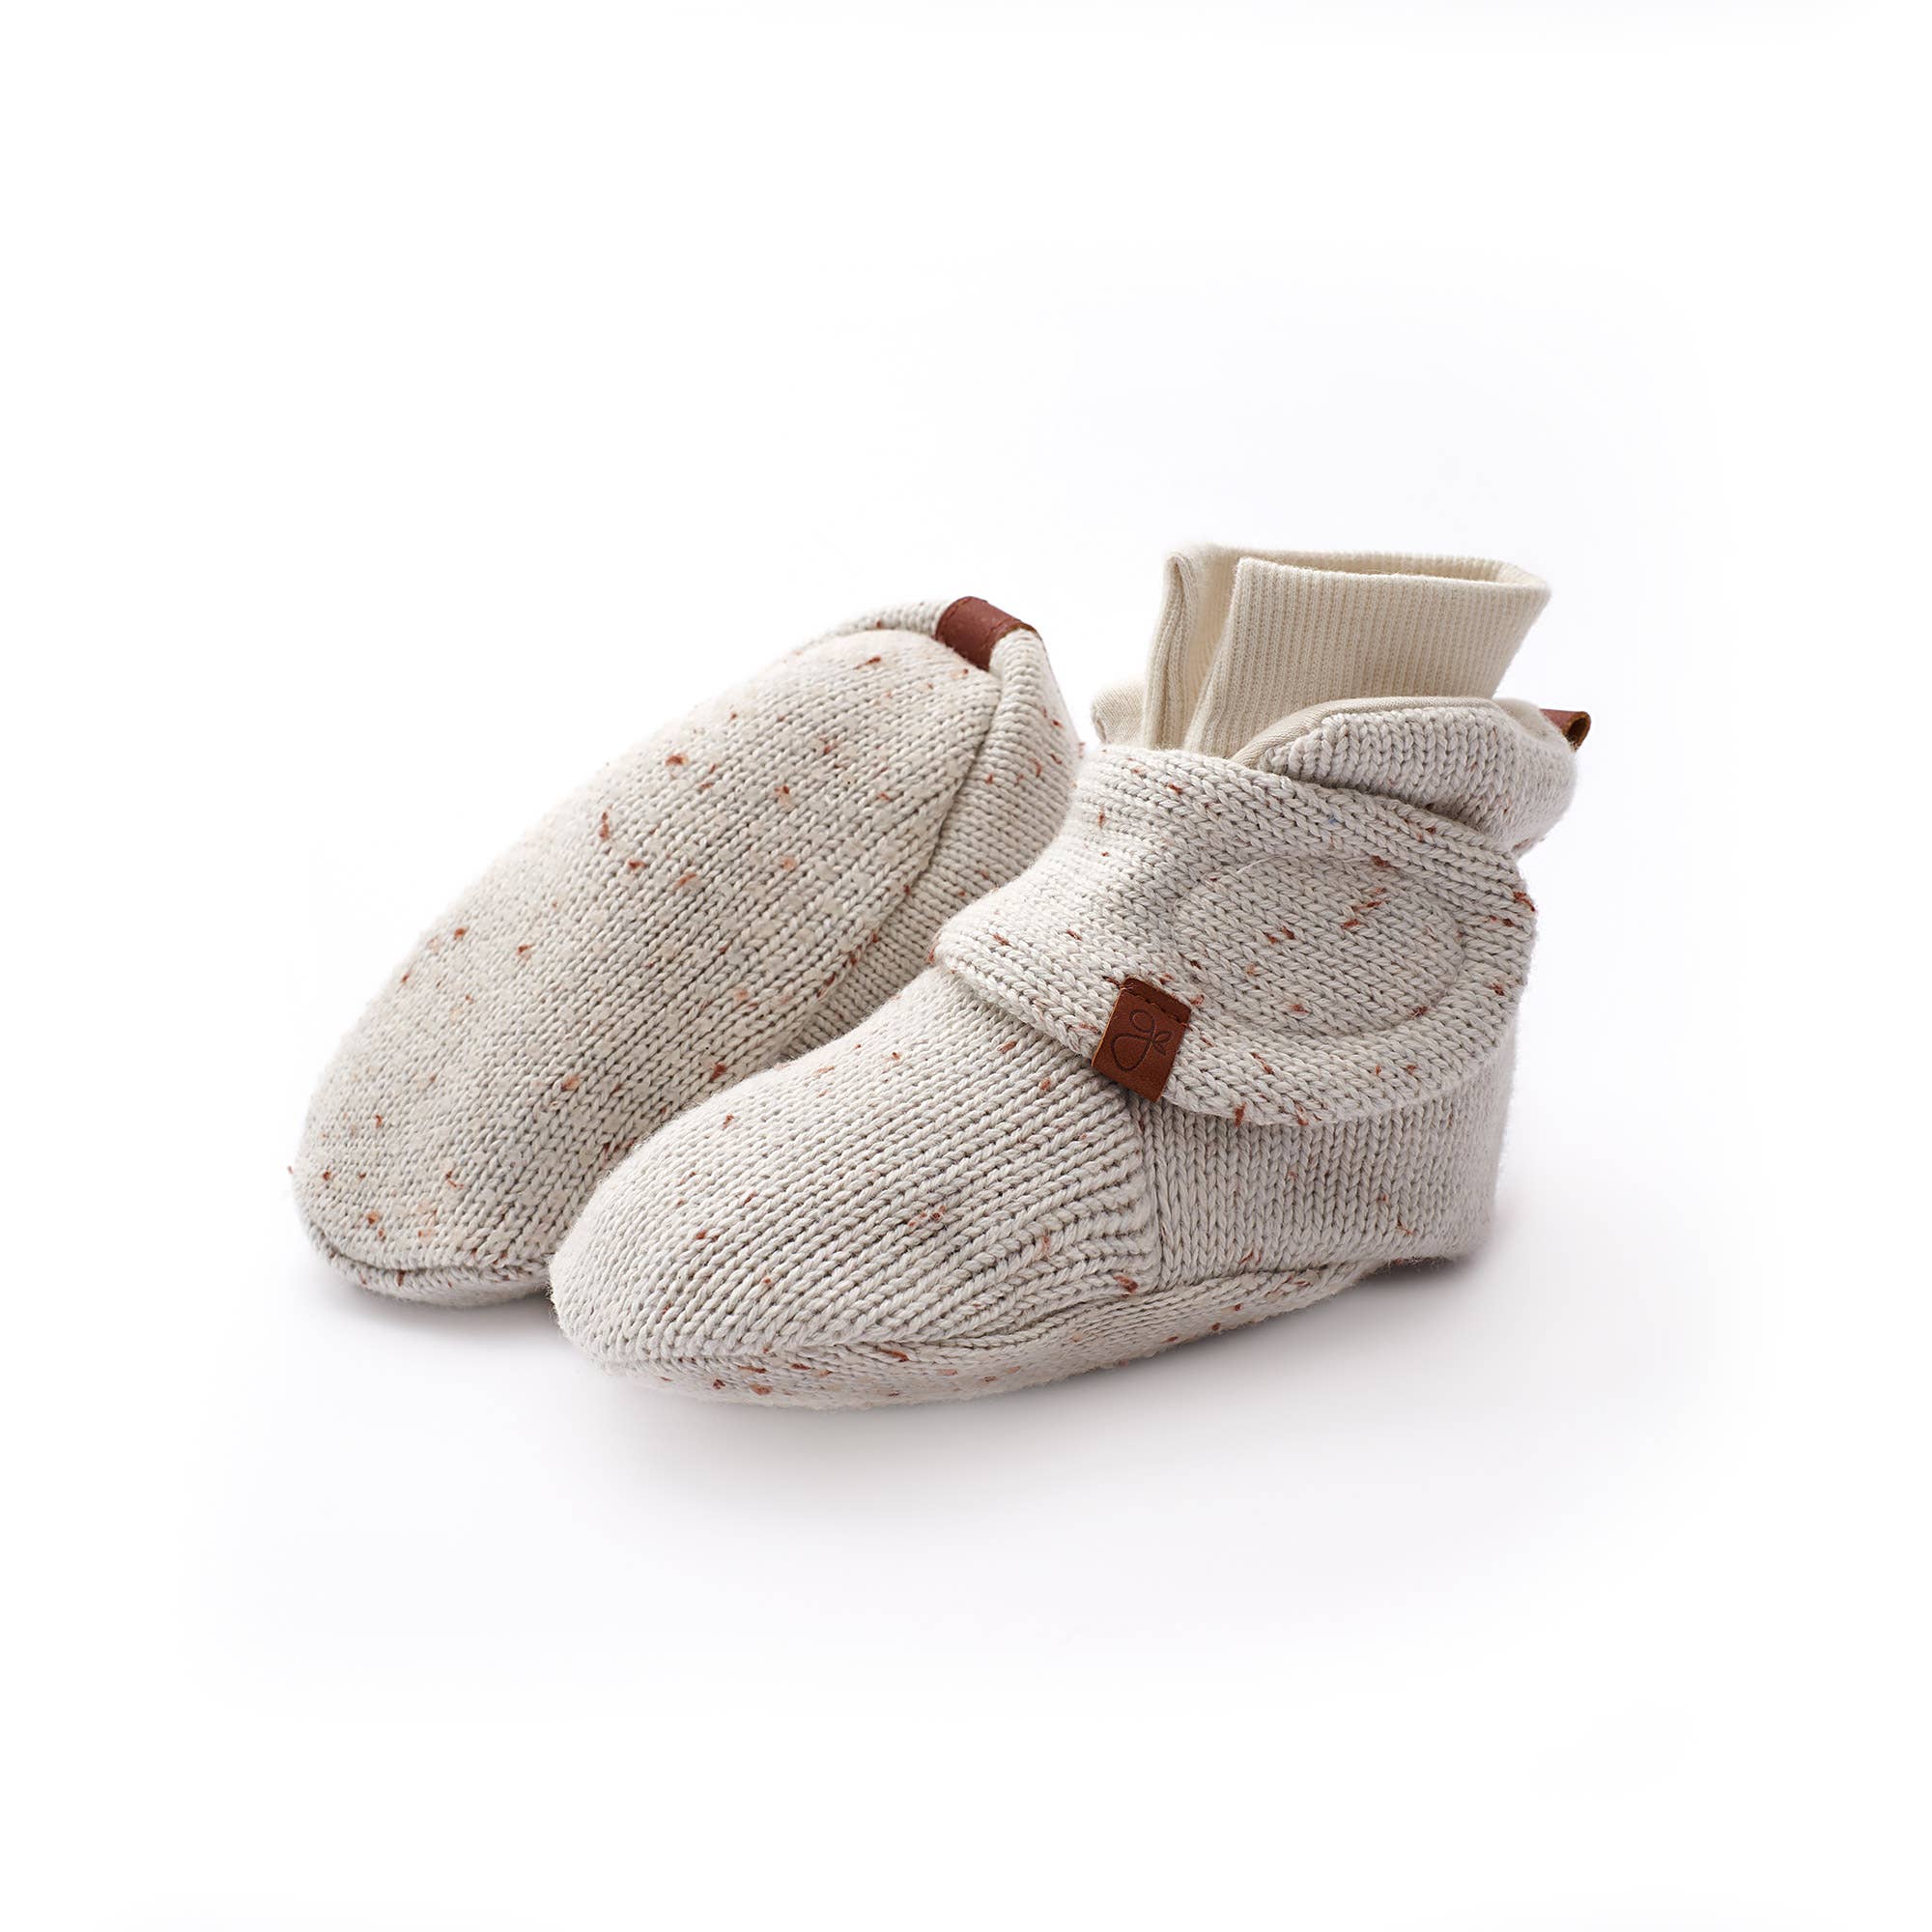 Knit Organic Cotton Stay-On Boots - Shell – Early Bird & Worm